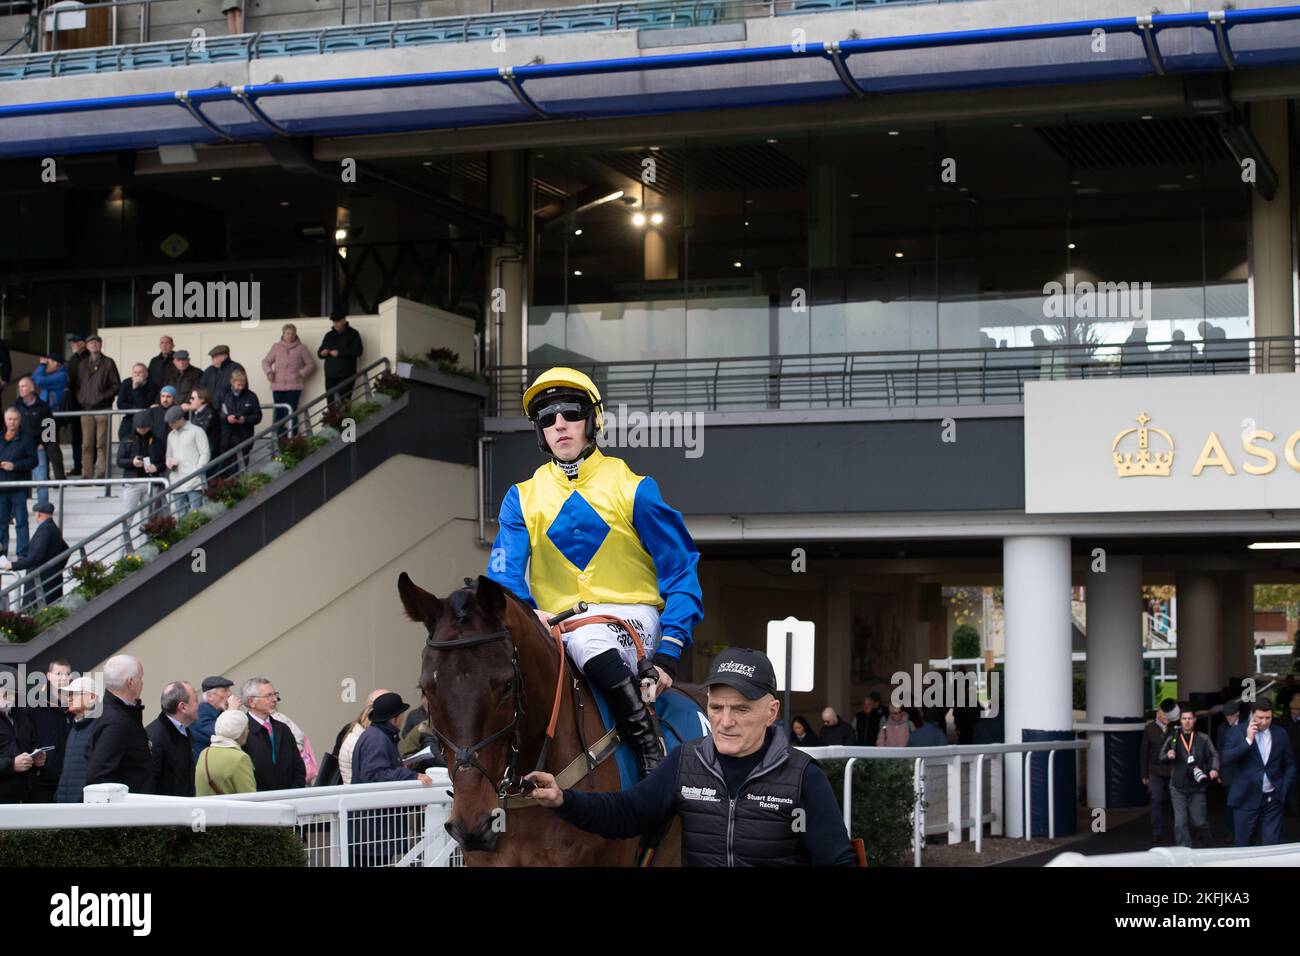 Ascot, Berkshire, UK. 18th November, 2022. Jockey Ciaran Gethings riding horse Bubble Dubi heads onto the racetrack before racing in the Troy Asset Management Introductory Hurdle Race at Ascot Racecourse. Credit: Maureen McLean/Alamy Live News Stock Photo